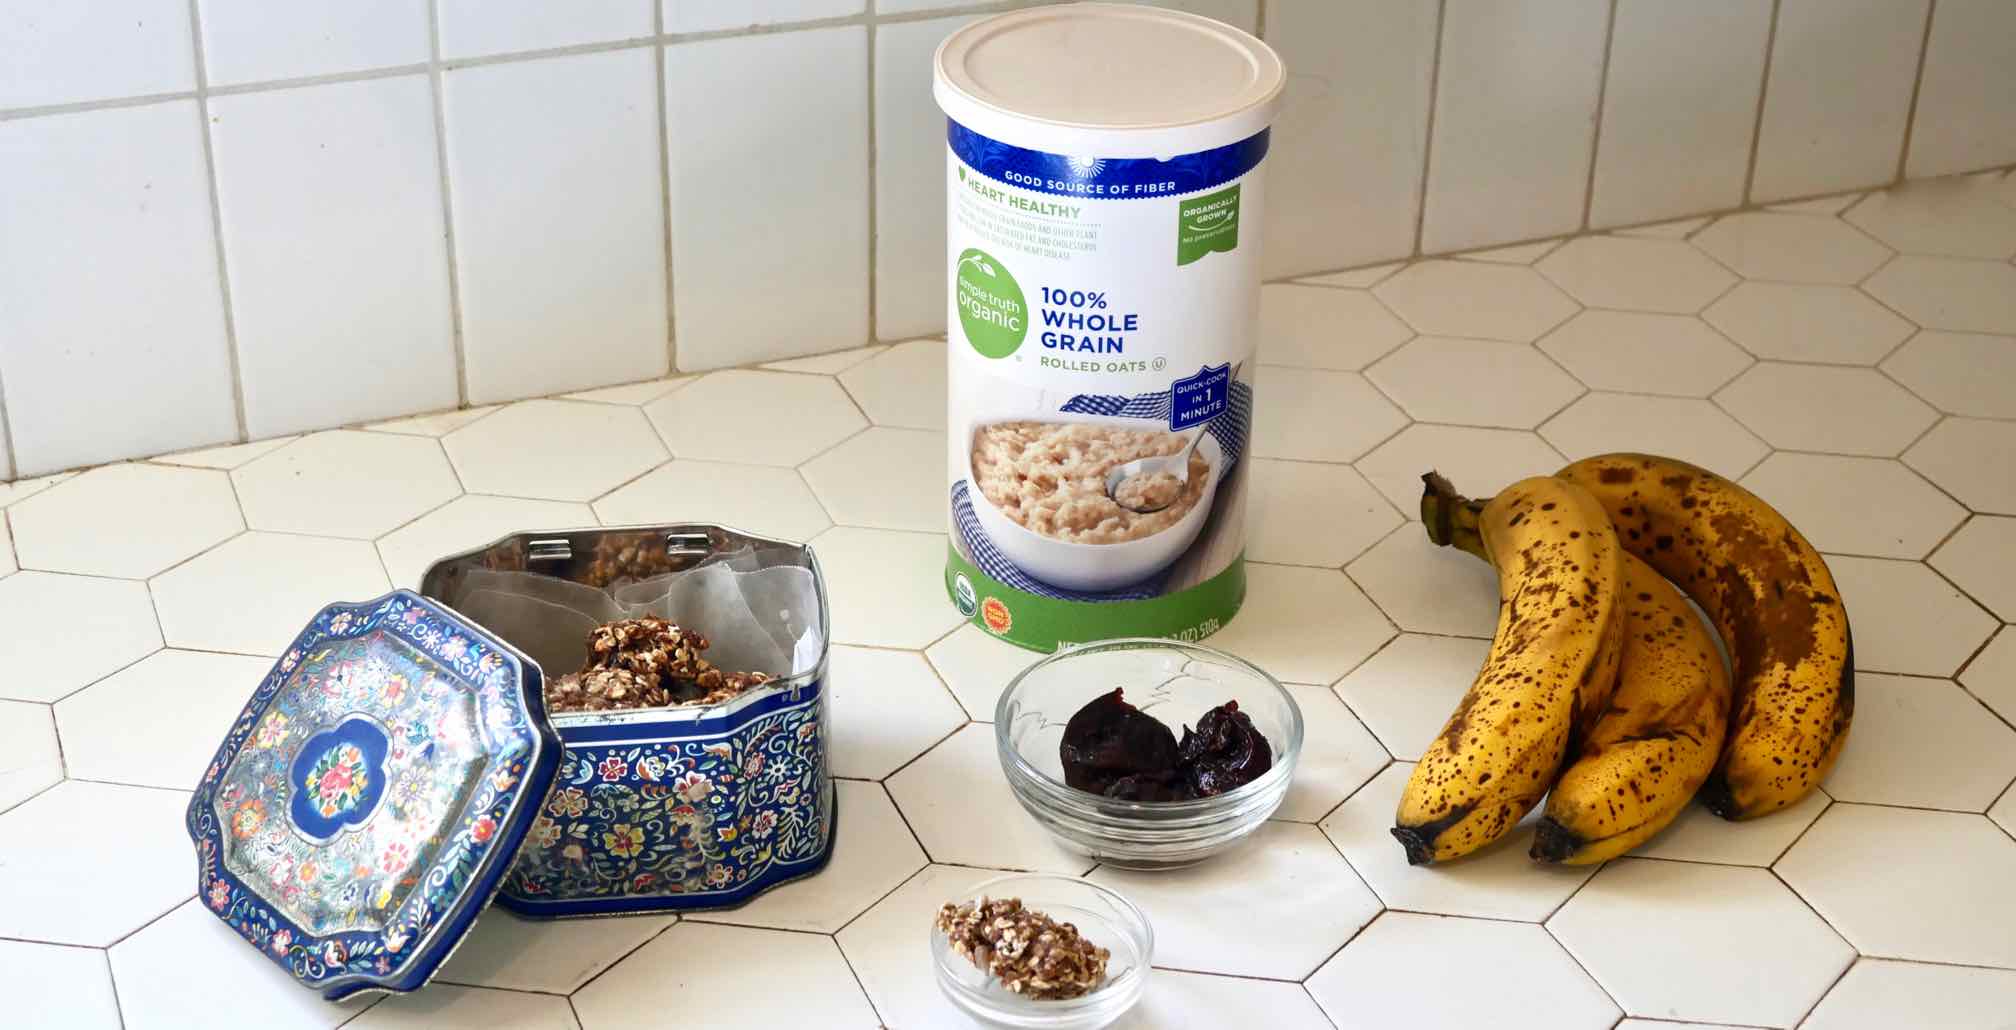 Cookie tin with healthy cookies, container of rolled oats, three prunes in a dish, one healthy cookie and three very ripe bananas